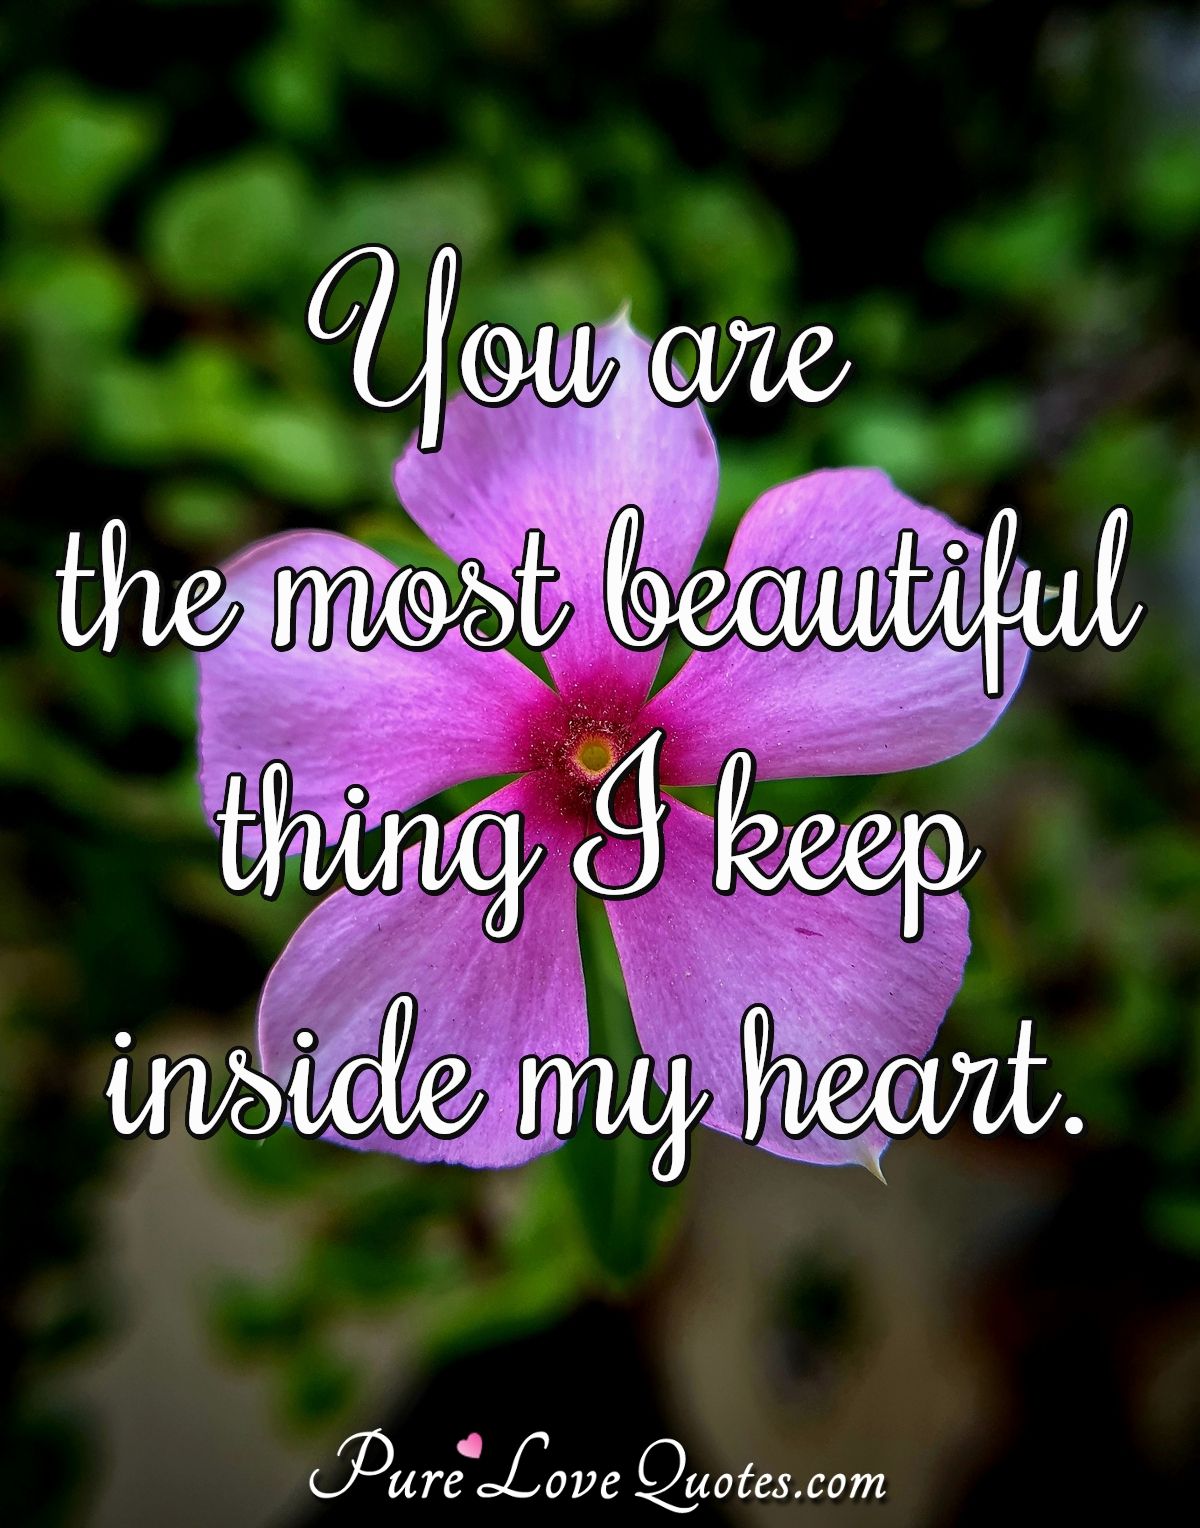 You are the most beautiful thing I keep inside my heart. - Anonymous